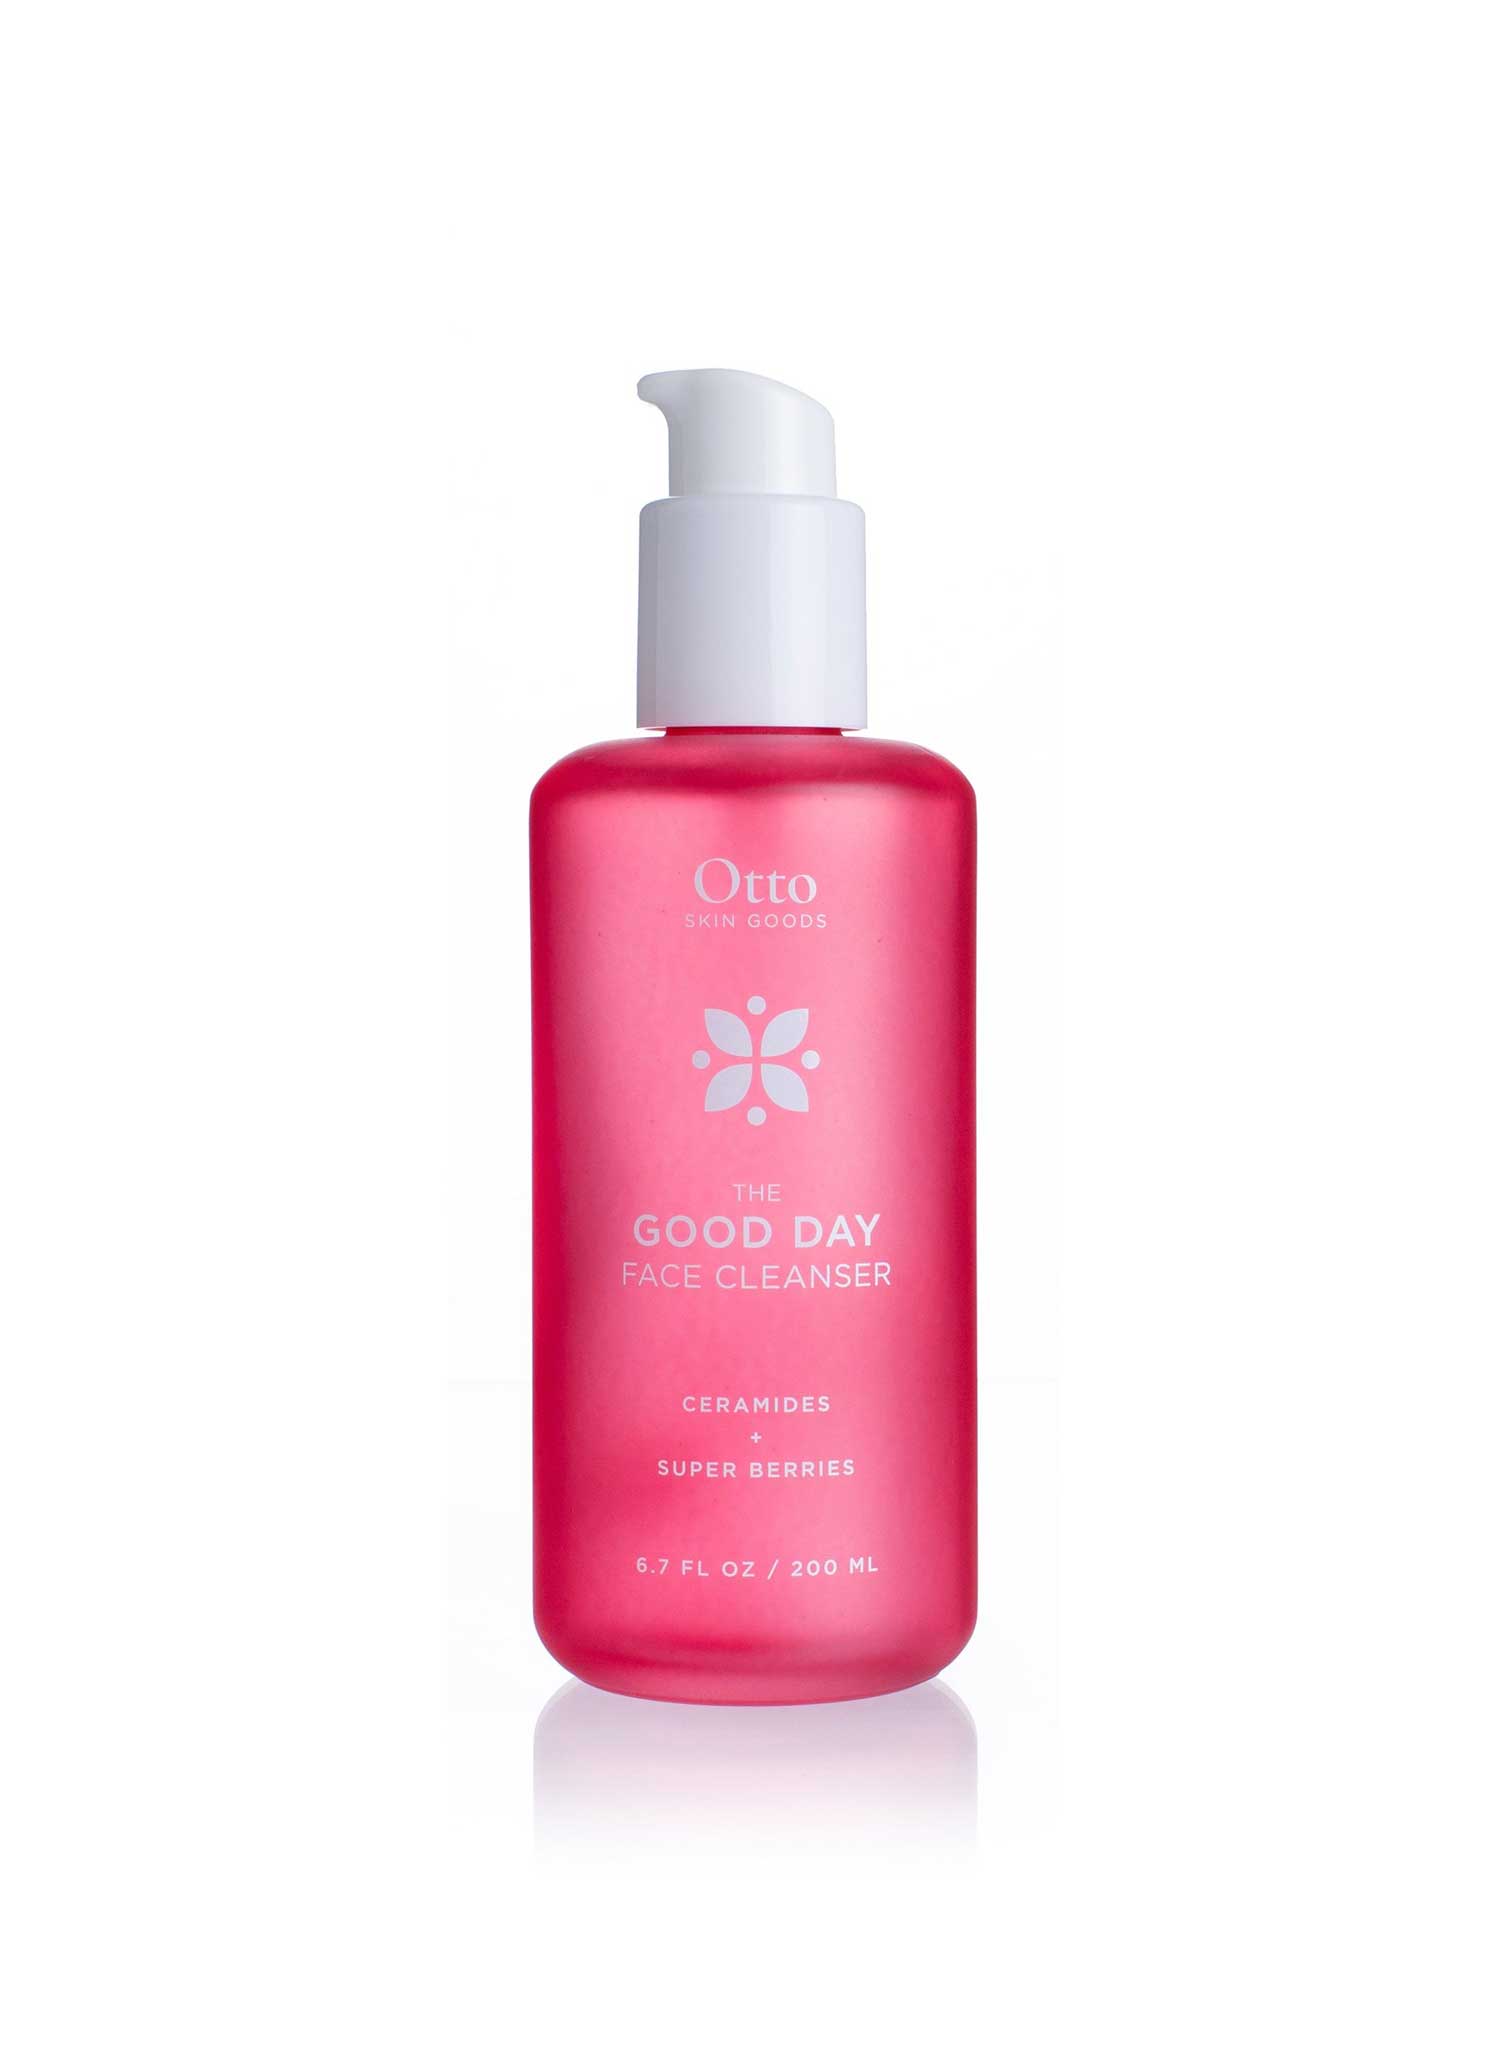 The Good Day Face Cleanser